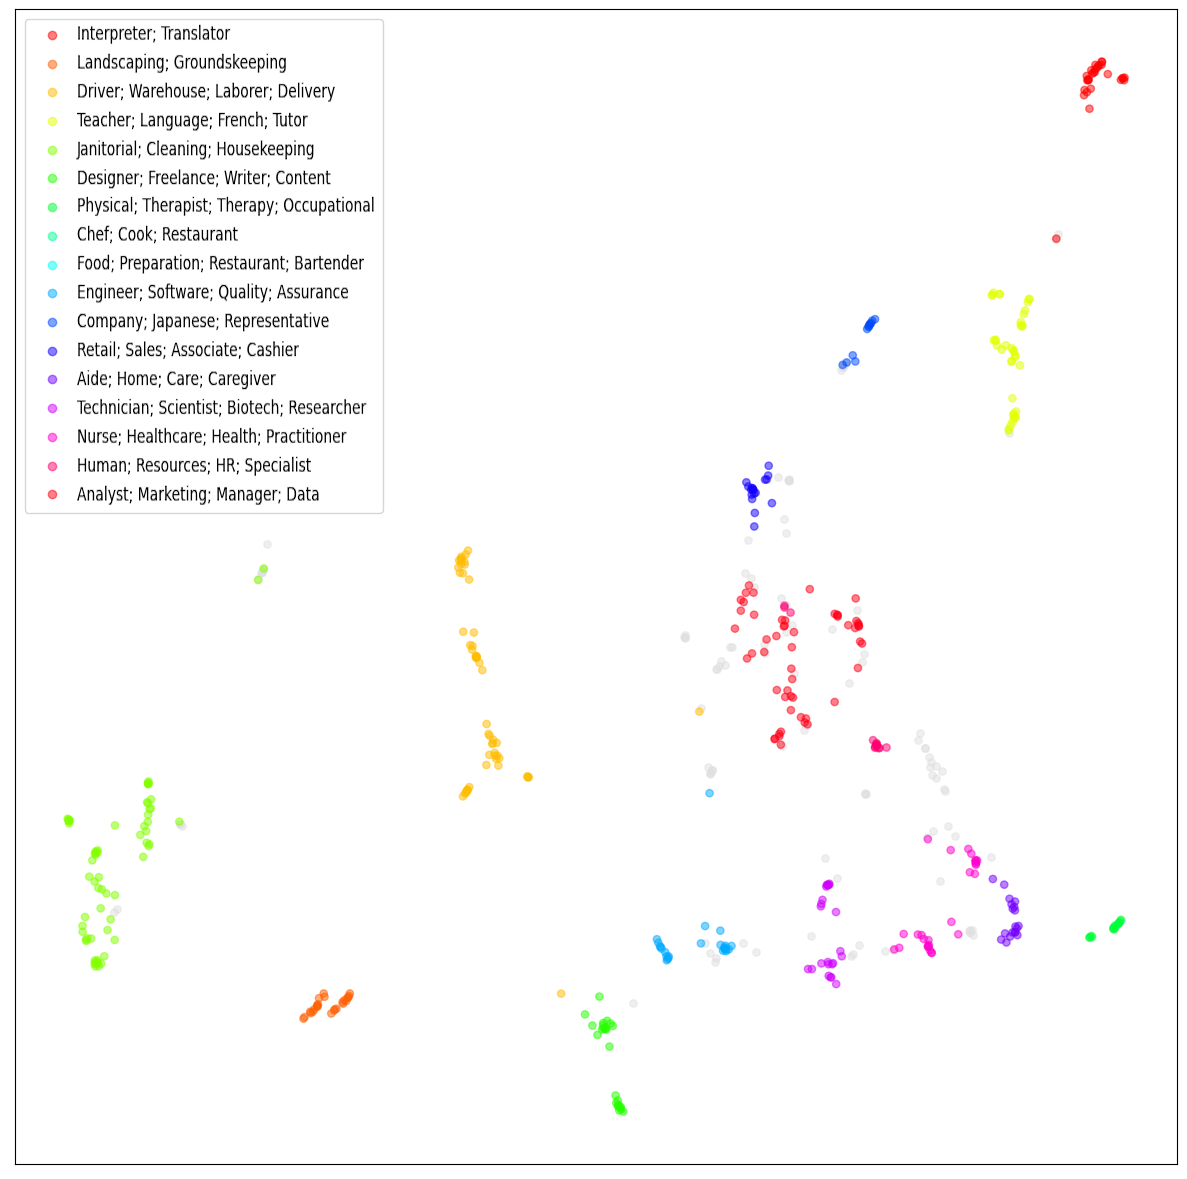 A two-dimensional visualization of the embedding space, showcasing all the job clusteres selected by BERTopic. Each job title is color-coded according to its cluster affiliation.